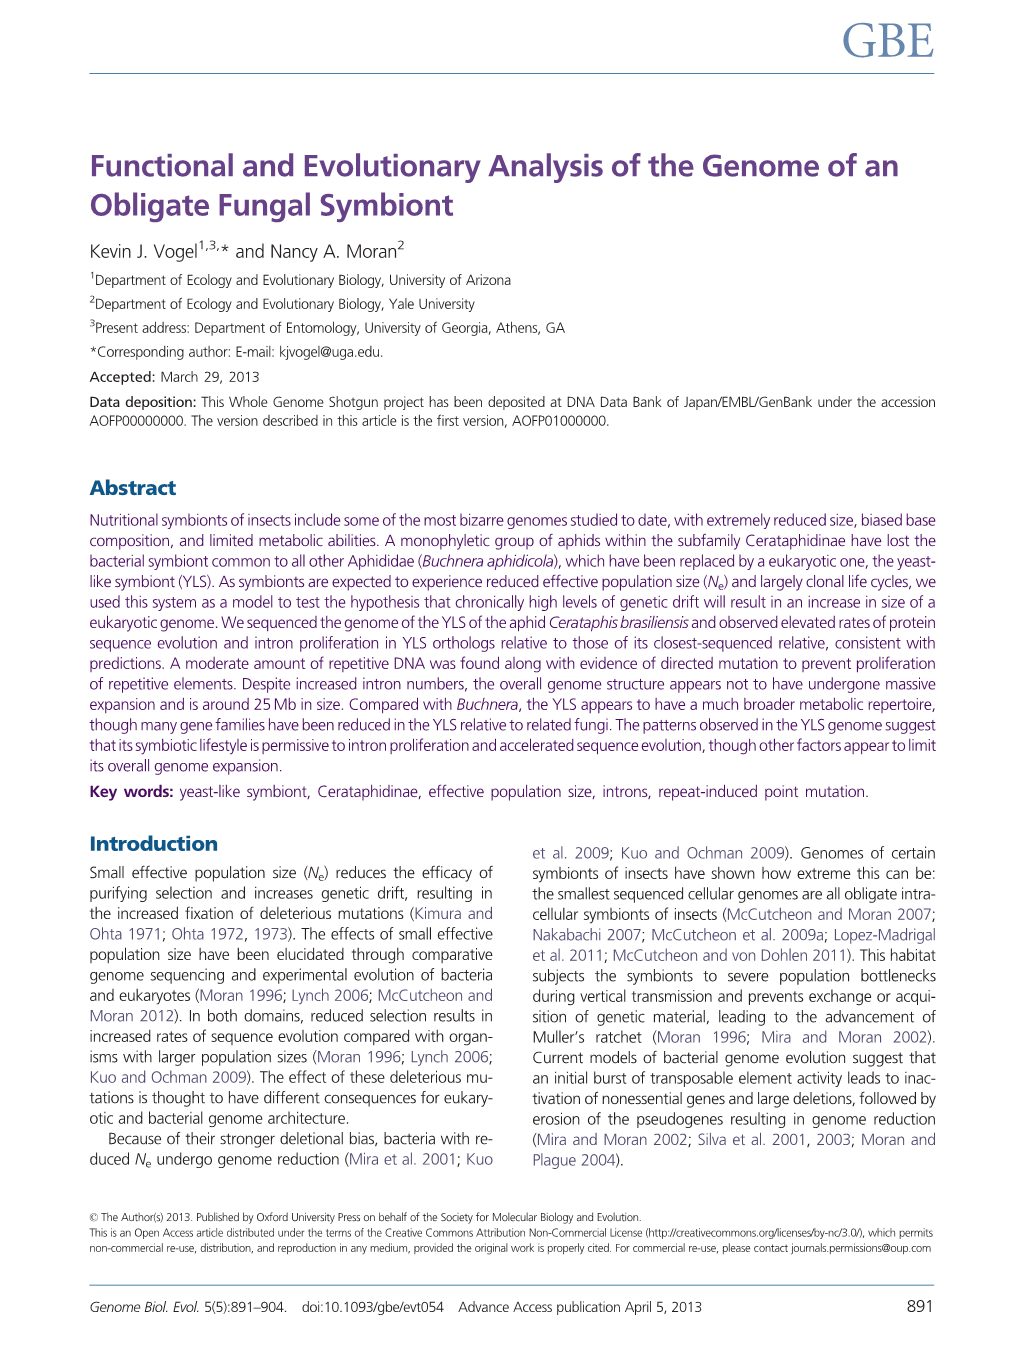 Functional and Evolutionary Analysis of the Genome of an Obligate Fungal Symbiont